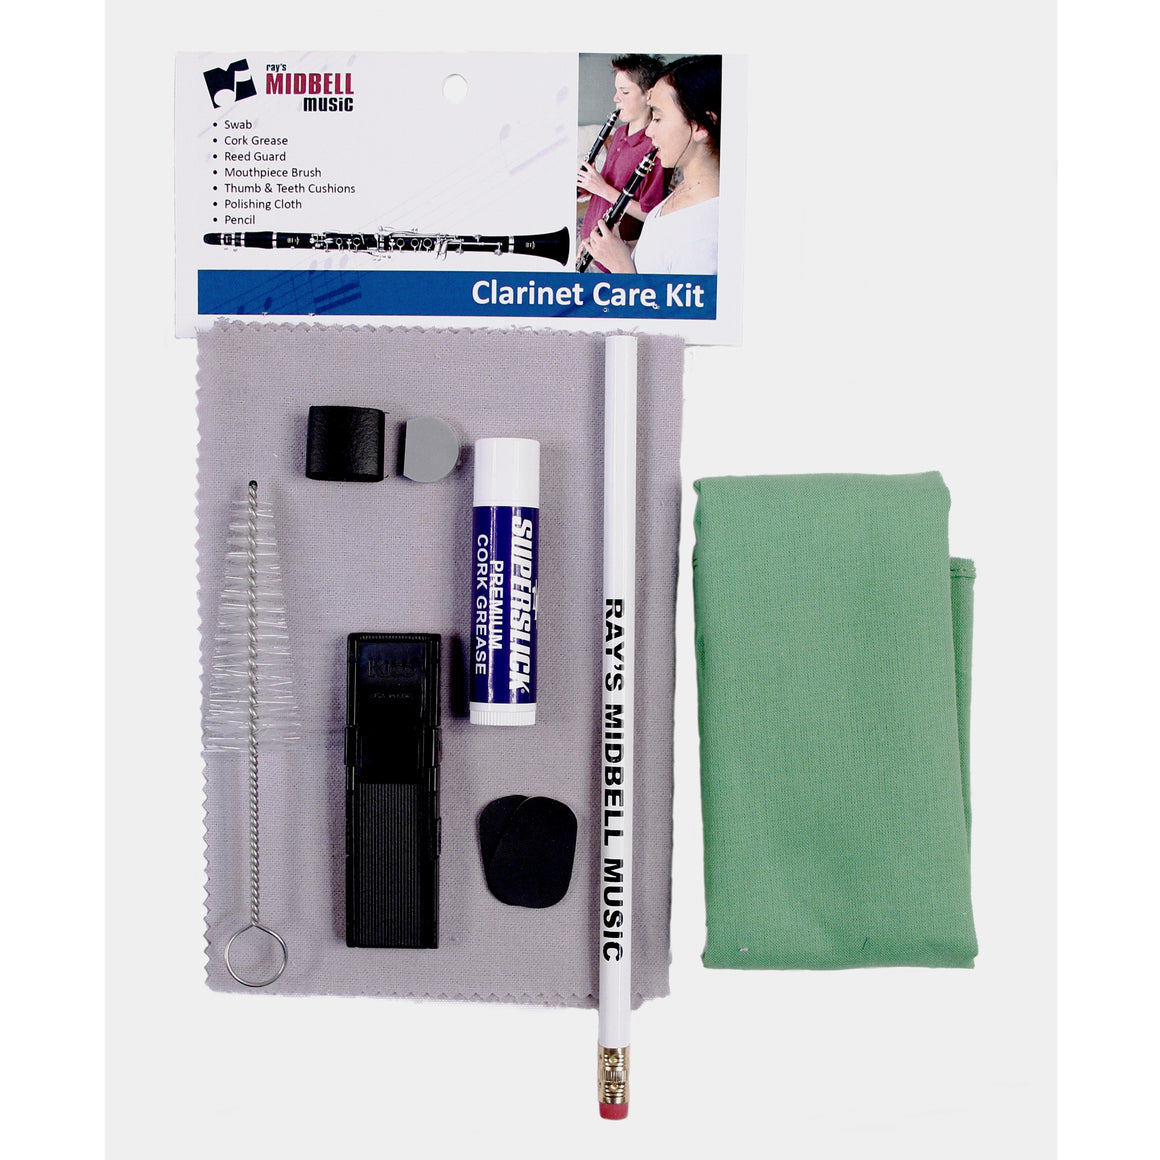 MIDBELL ICCK Clarinet Care Kit